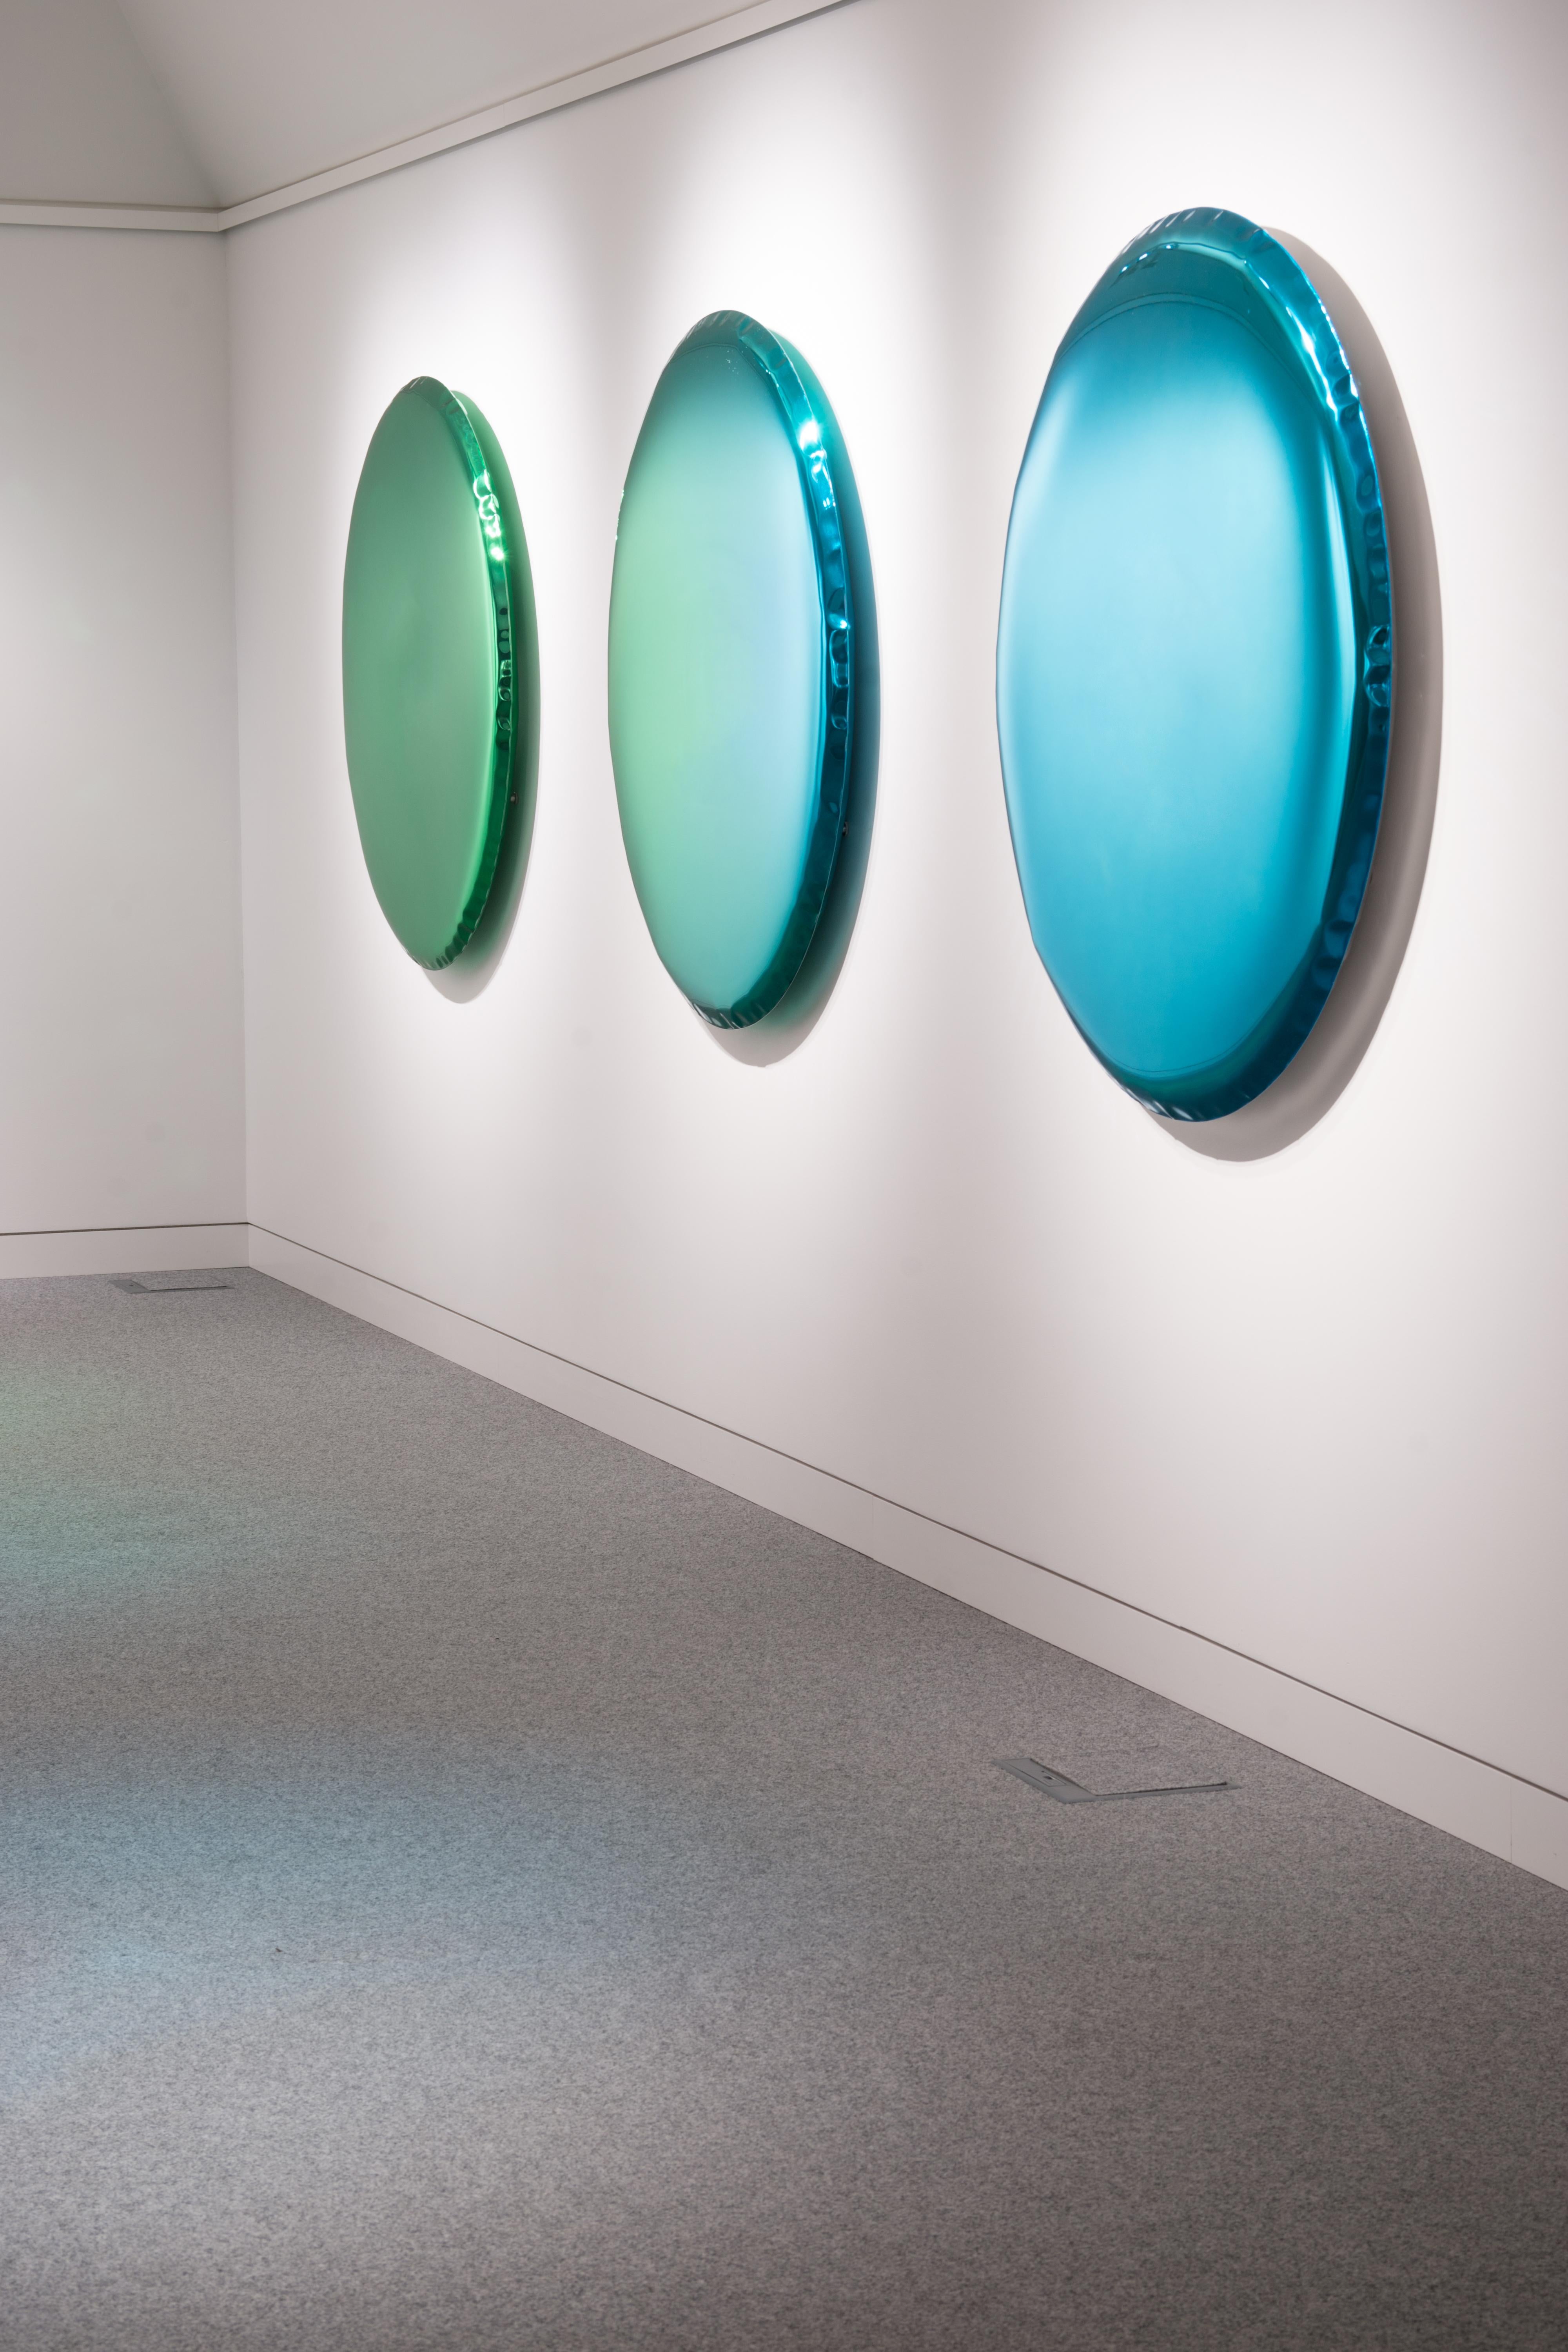 'OKO 36' contemporary mirror by Zieta
Gradient collection

Stainless steel
Measures: 36 x 6 cm.

Three colors available: 
- Emerald green 
- Sapphire blue
- Gradient emerald/sapphire

Zieta Studio objects transgress the border between art